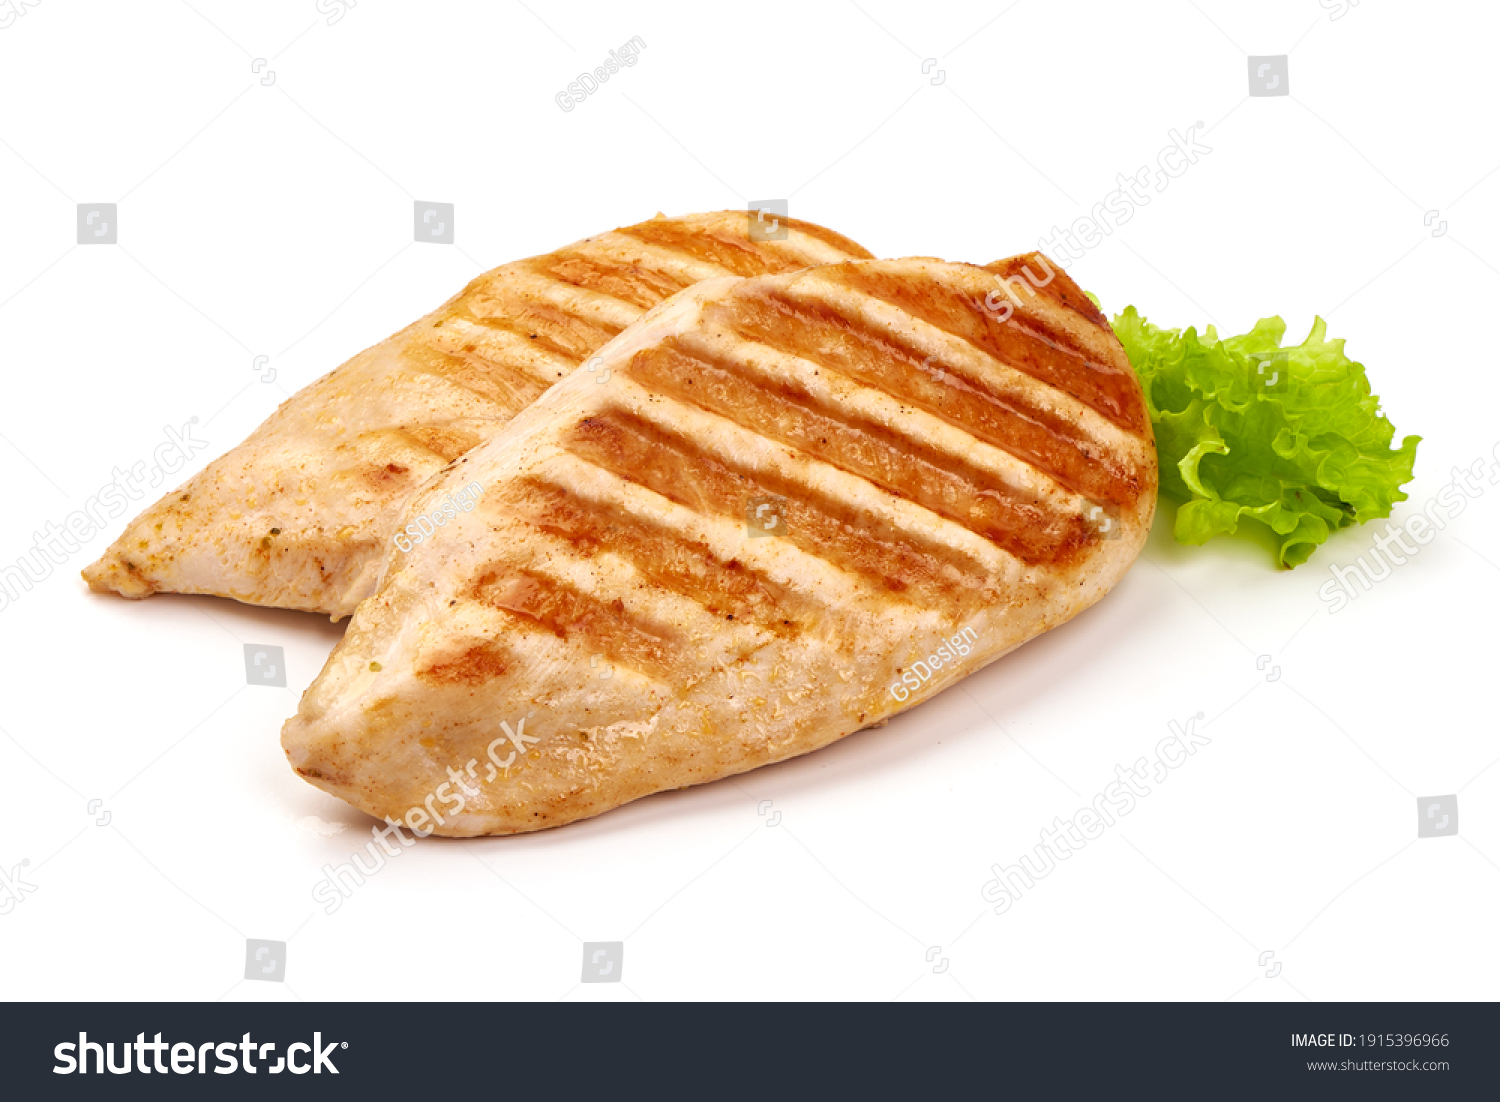 Chicken breast, grilled meat, isolated on white background. #1915396966